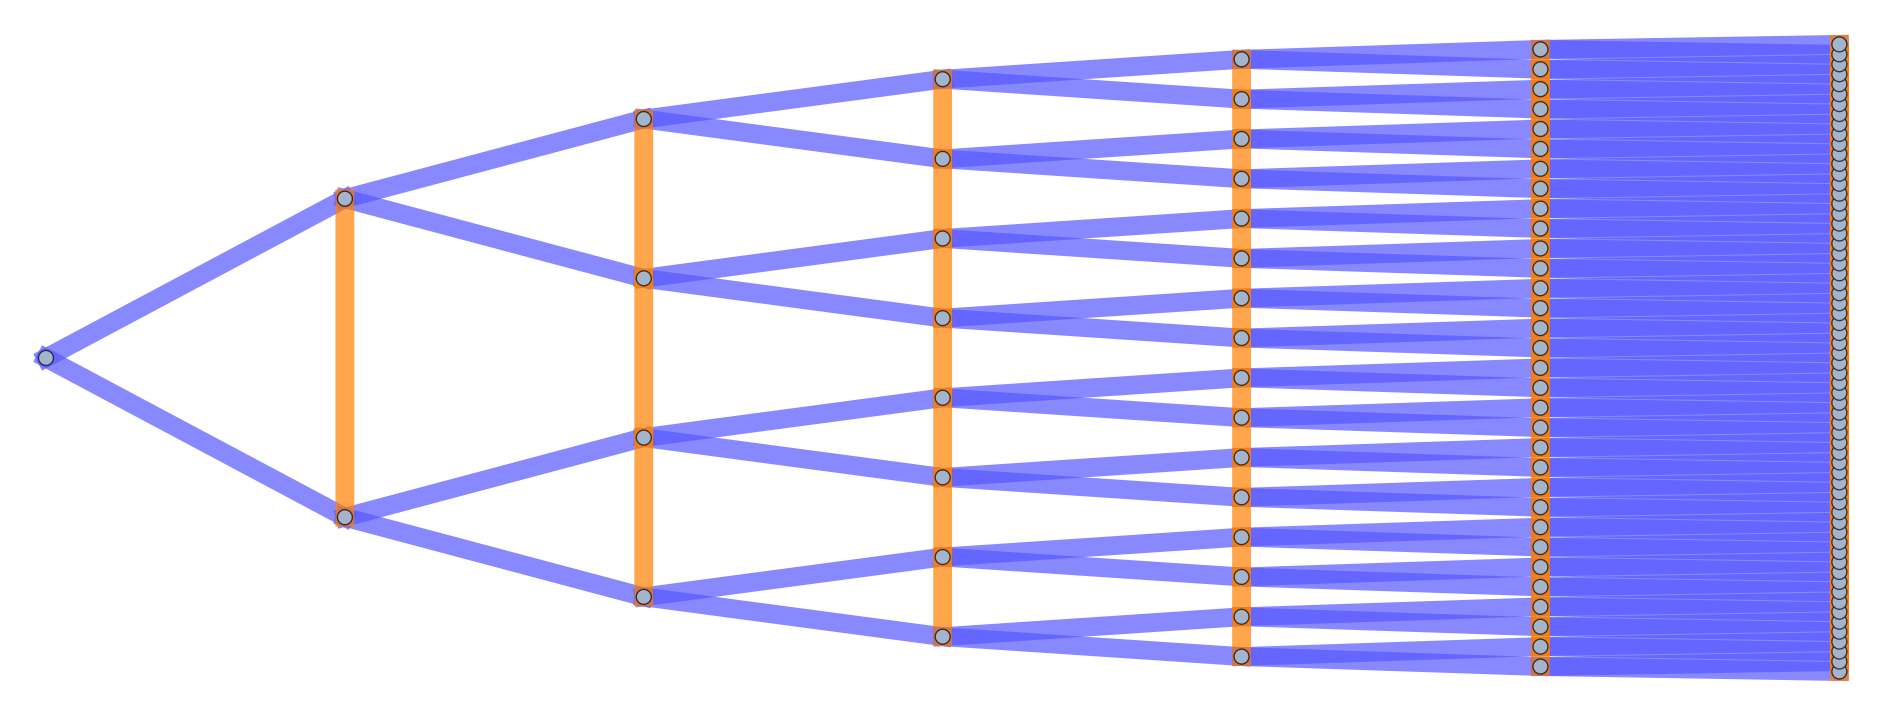 The first seven levels of the graph lineage of path graphs, with ancestry relationships. \Delta l = 0 edges are colored in orange, \Delta l =\pm 1 edges are colored in blue. Self-loops are not illustrated.